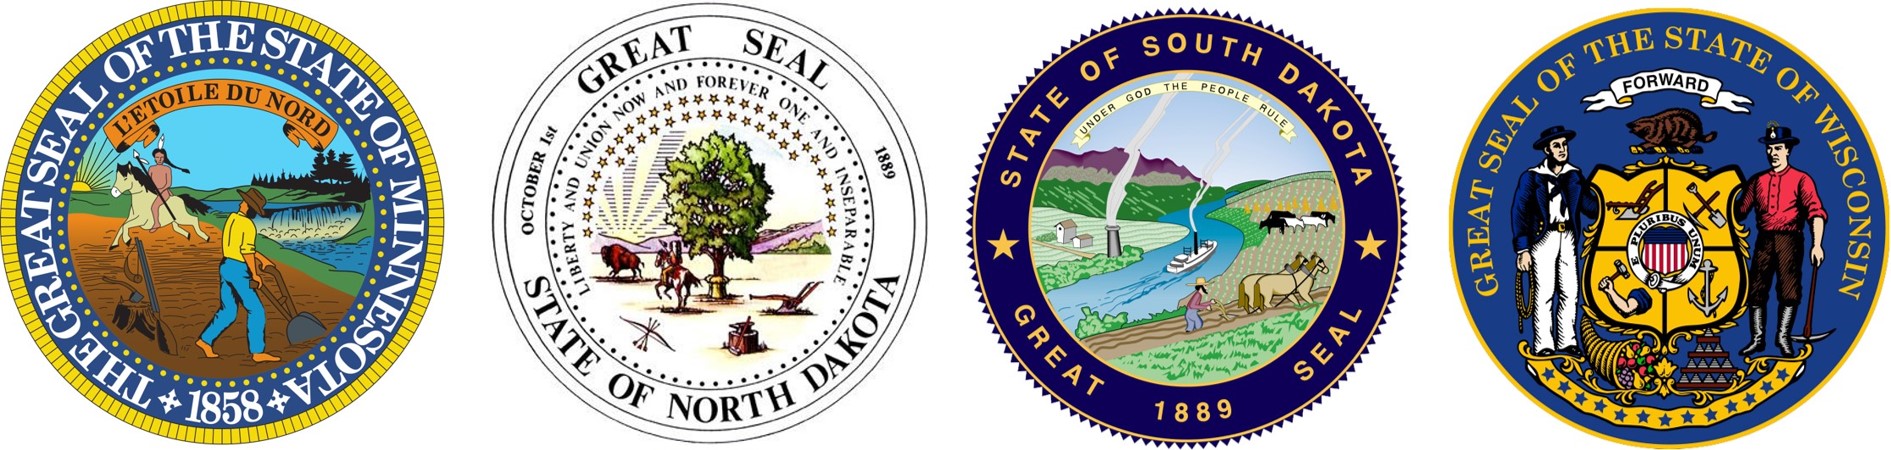 St. Paul Field Division State Seals